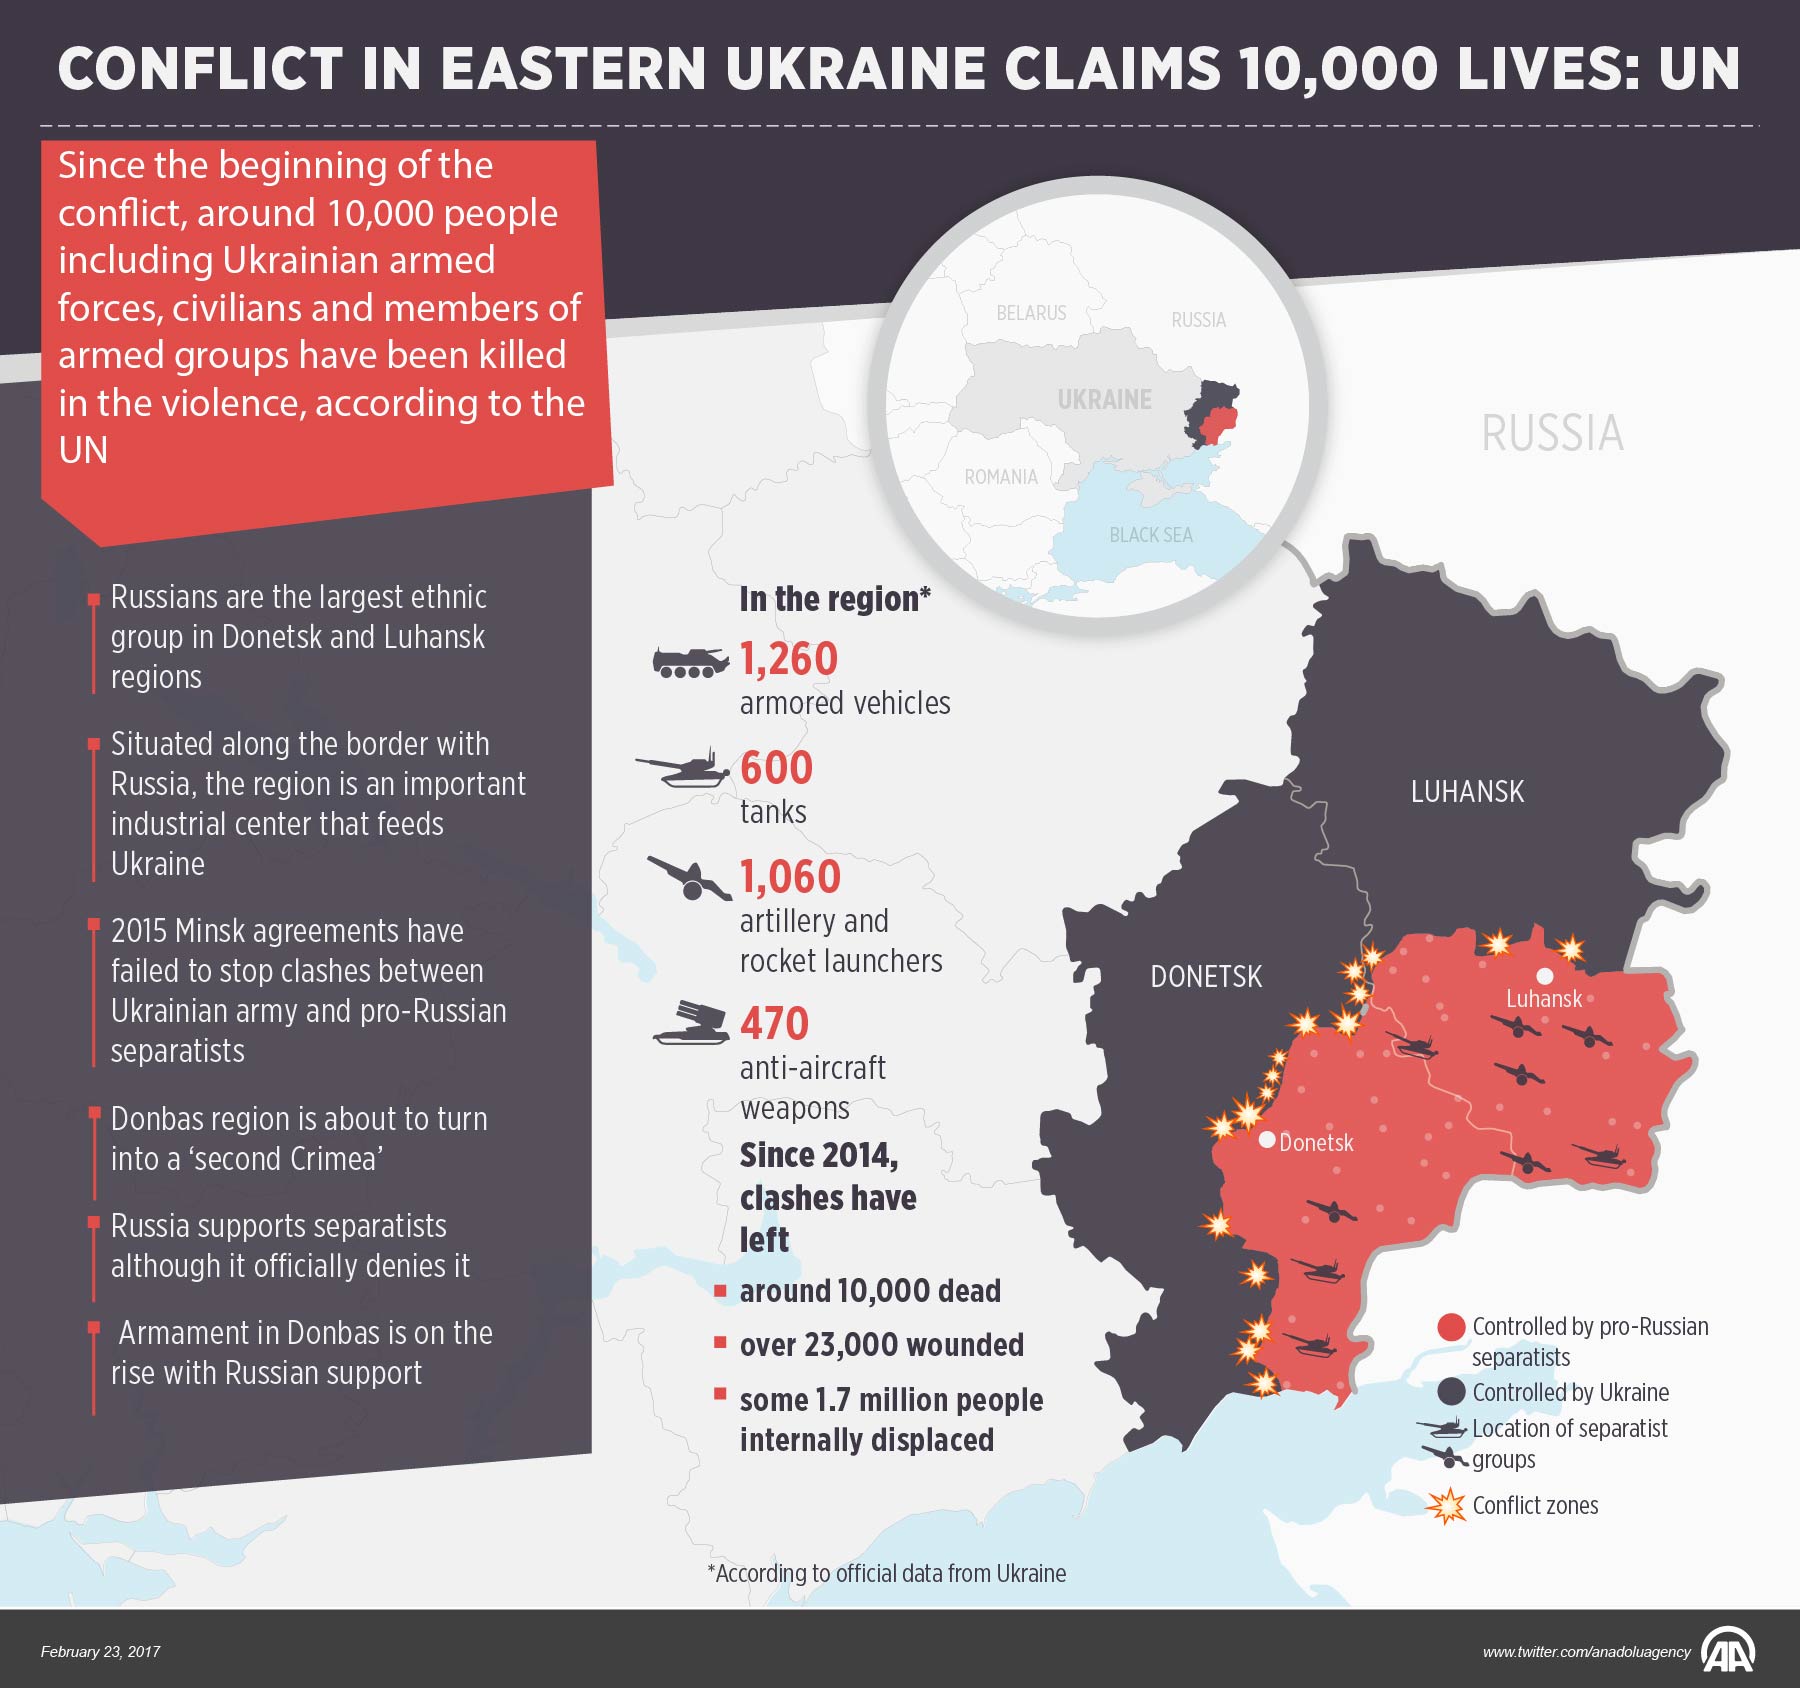 Conflict in Eastern Ukraine claims 10,000 lives: UN